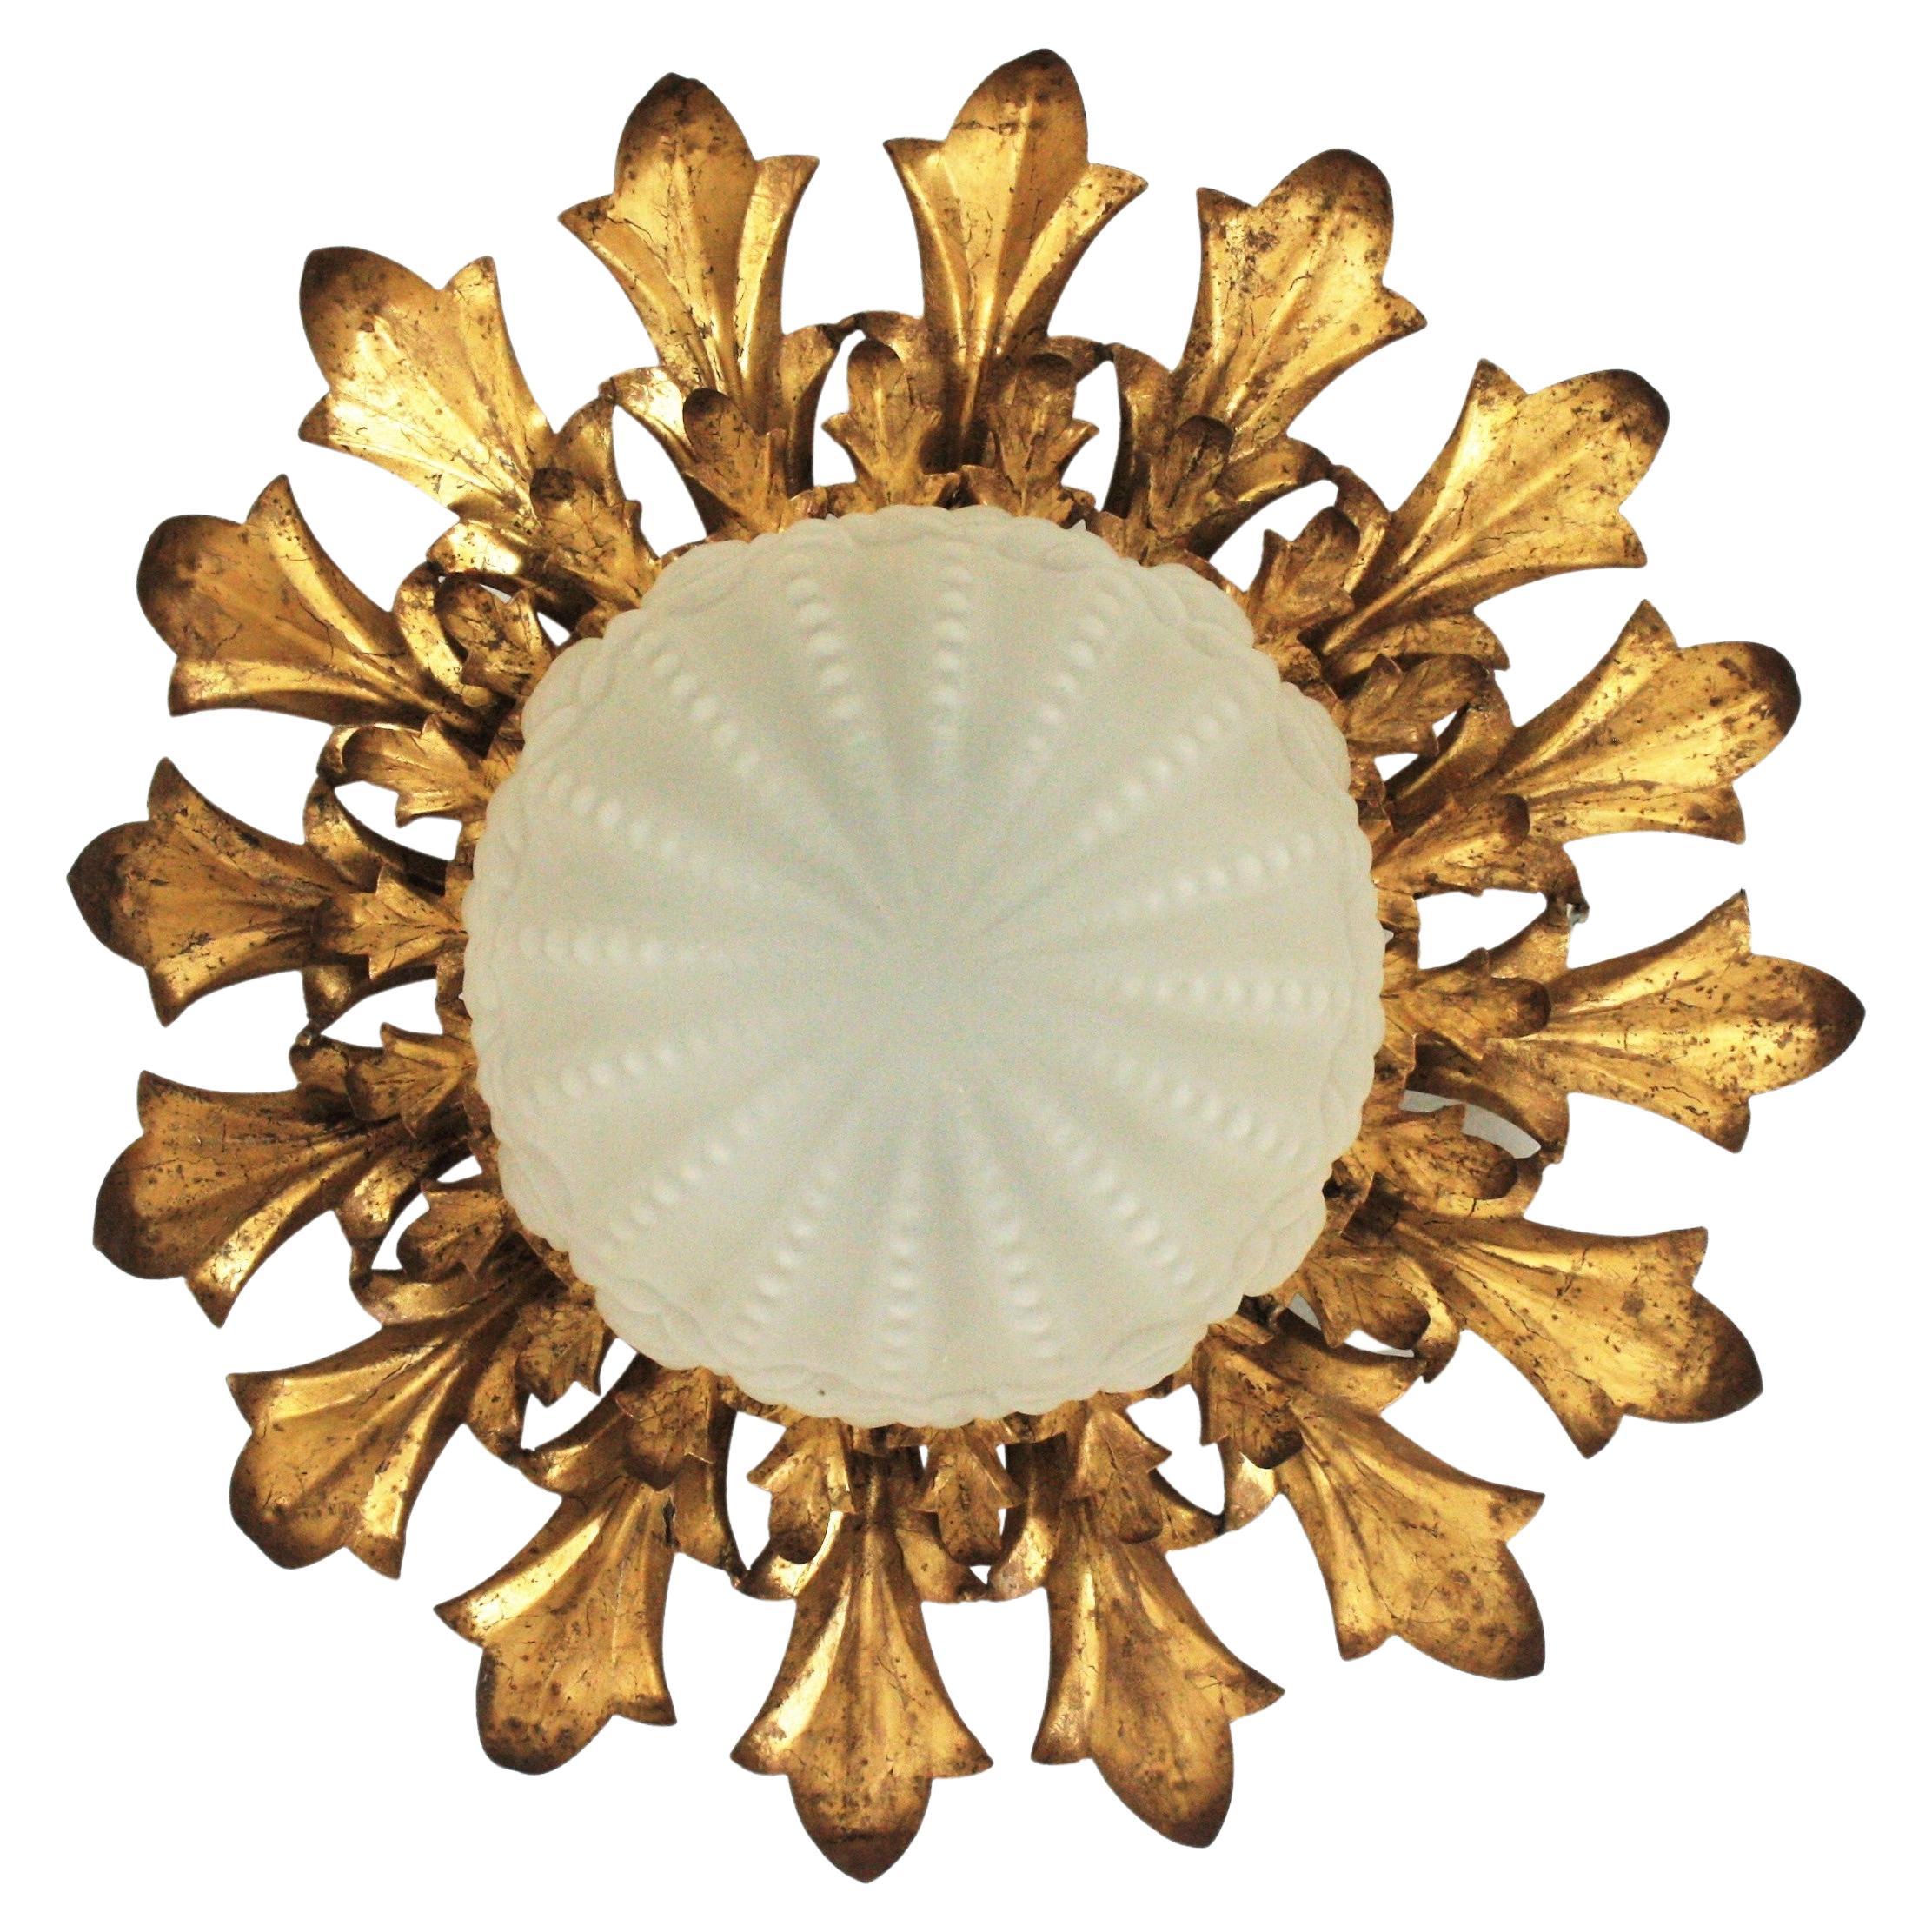 Eye catching sunburst light fixture with foliage design and frosted glass globe shade, Spain, 1950s
This ceiling flush mount has two layers of leaves in gilt iron surrounding a central frosted glass globe shaped shade with textured details. It shows